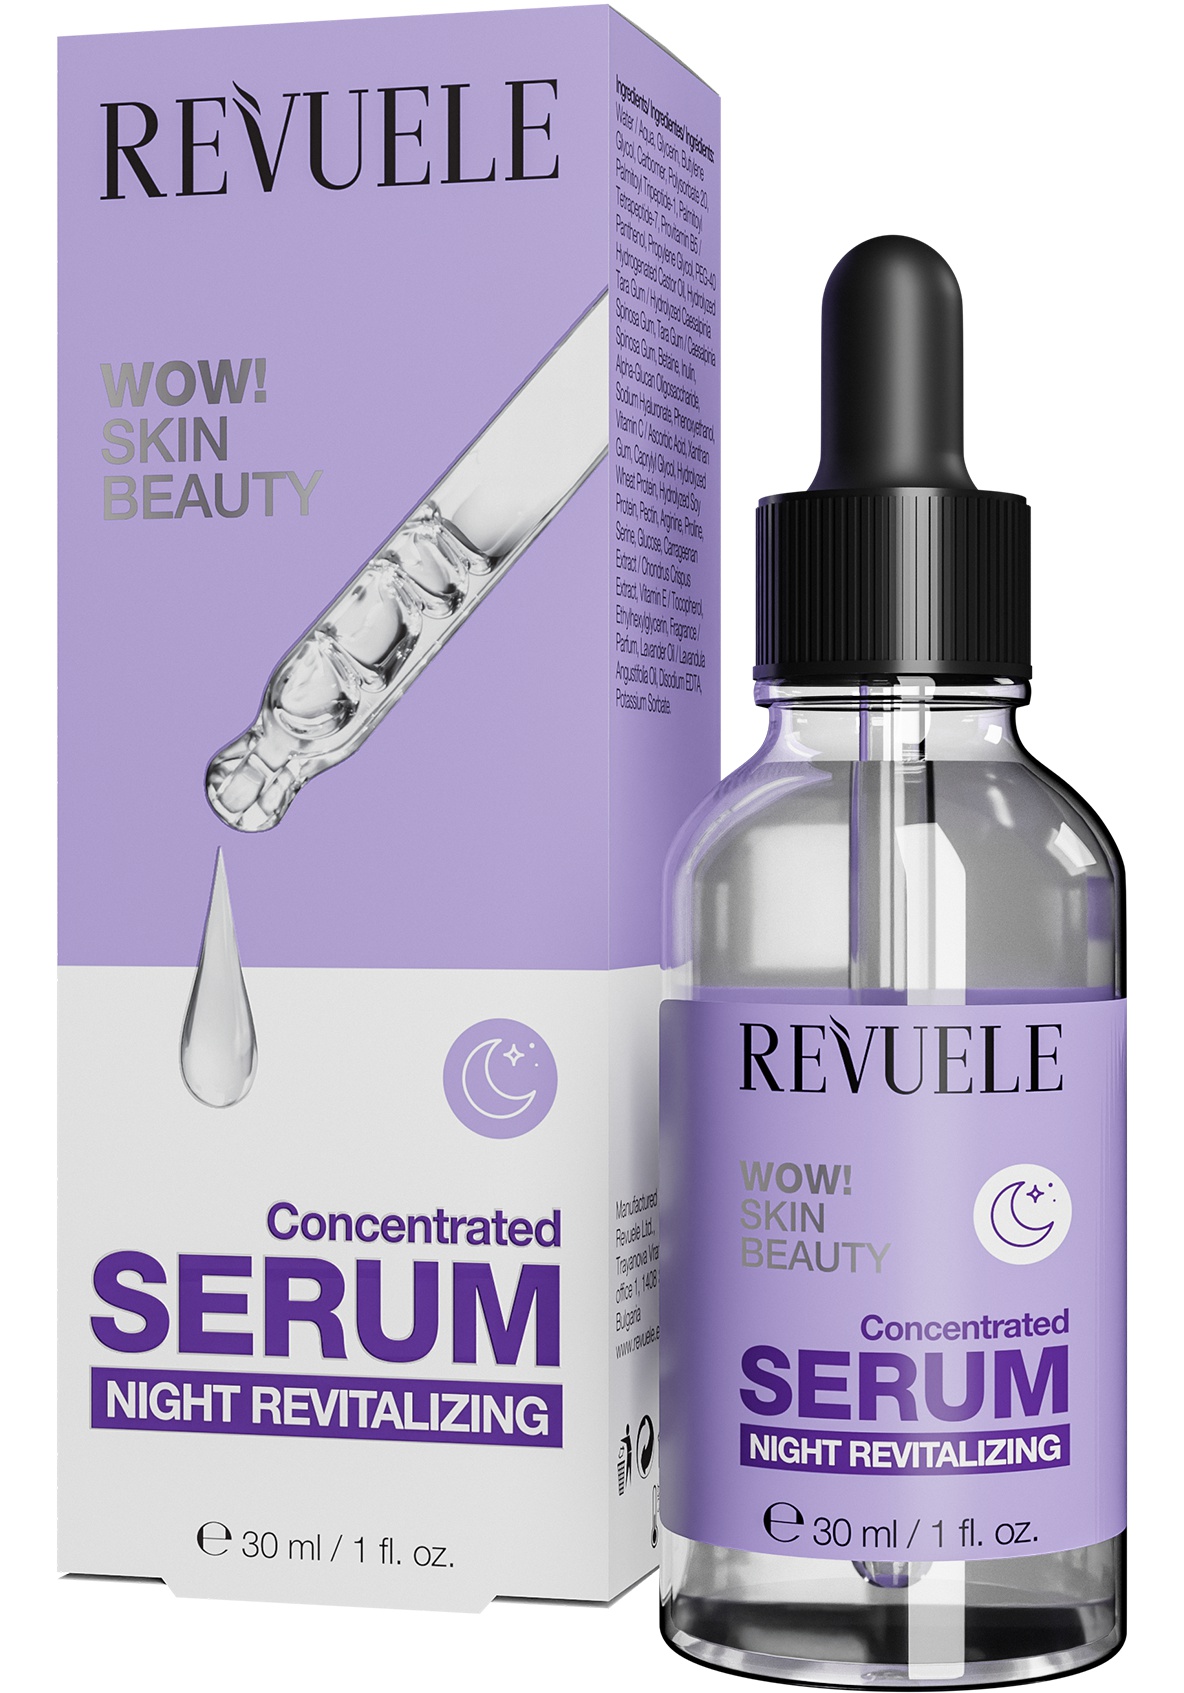 Revuele Wow! Skin Beauty Concentrated Serum Night Revitalizing